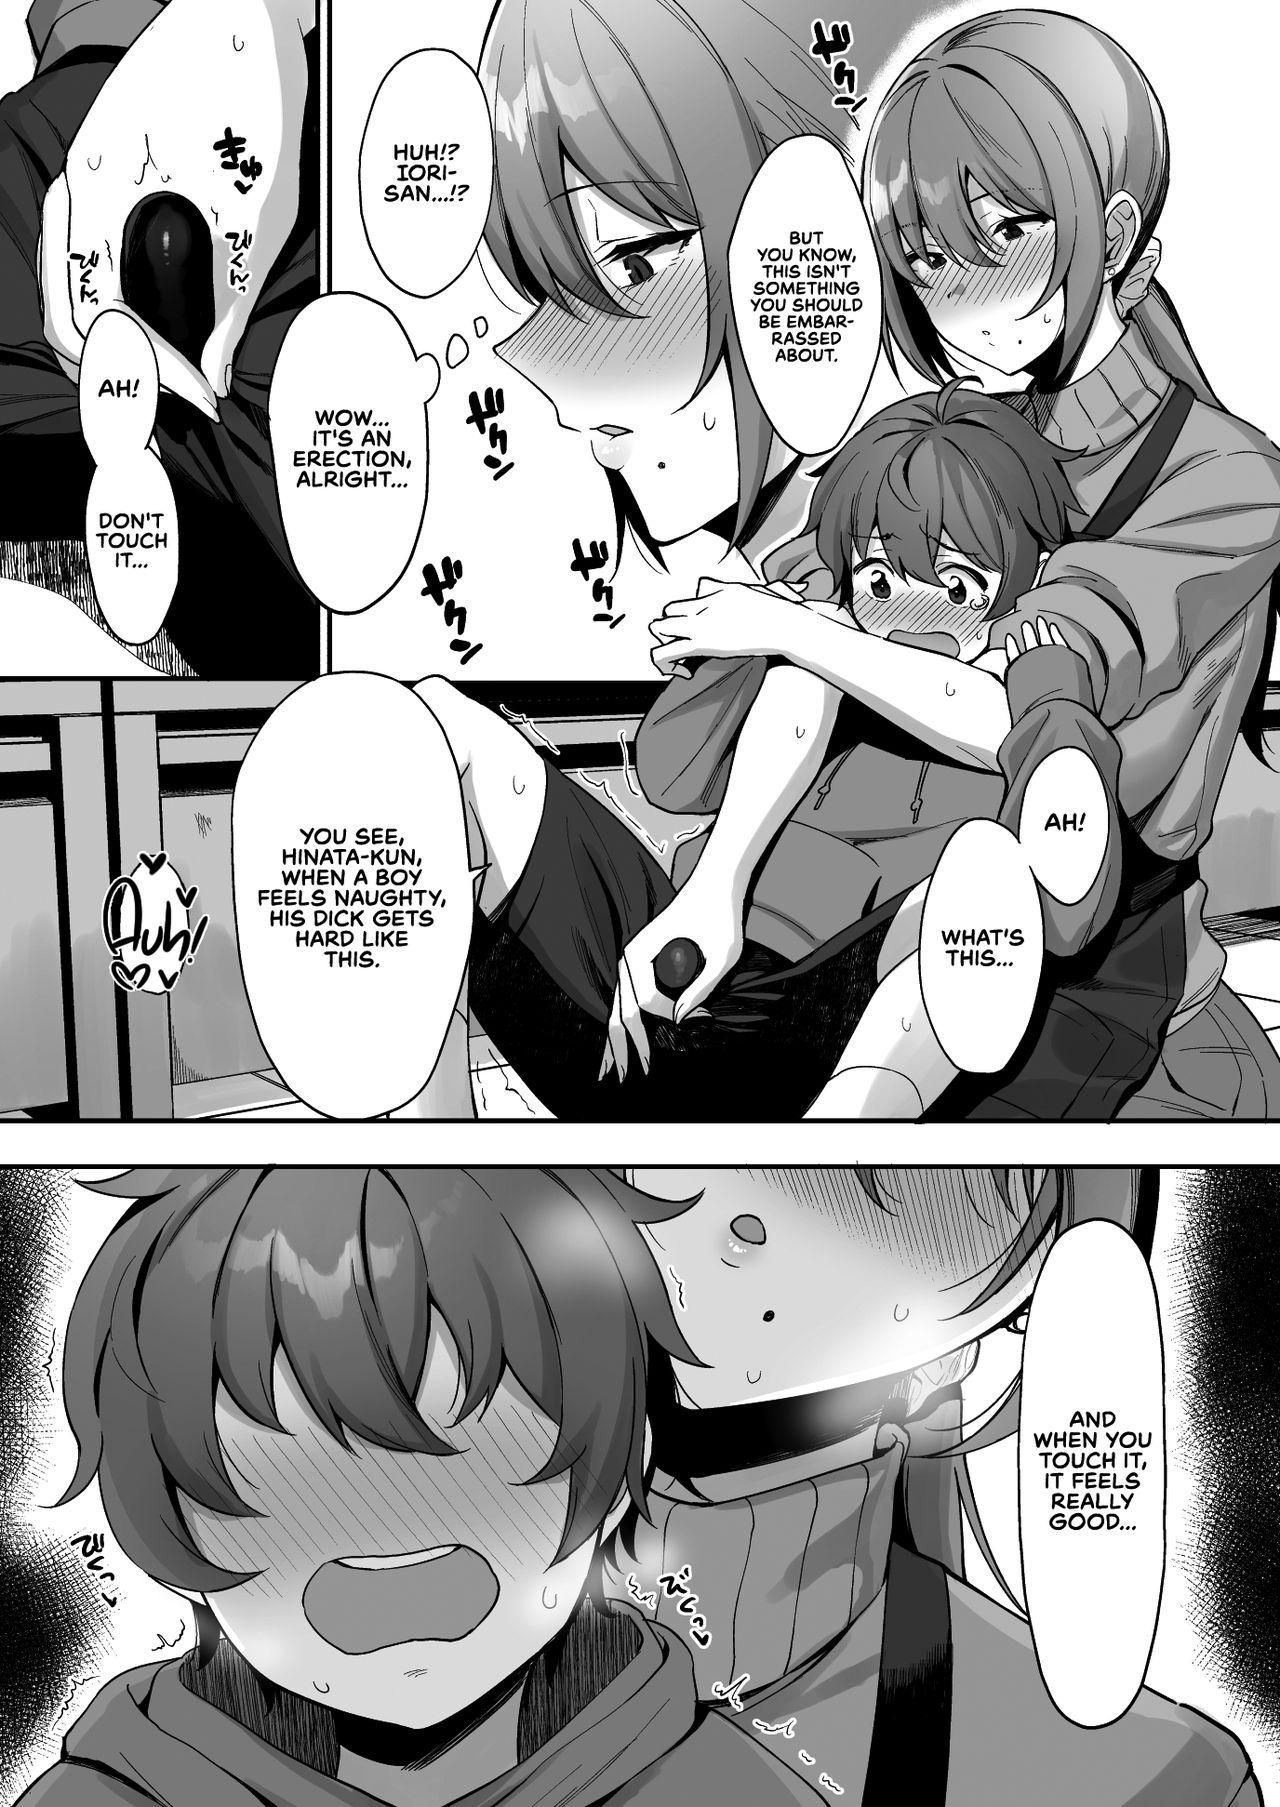 Socks Furuhonya no Onee-san to | With The Lady From The Used Book Shop - Original Fuck Hard - Page 10